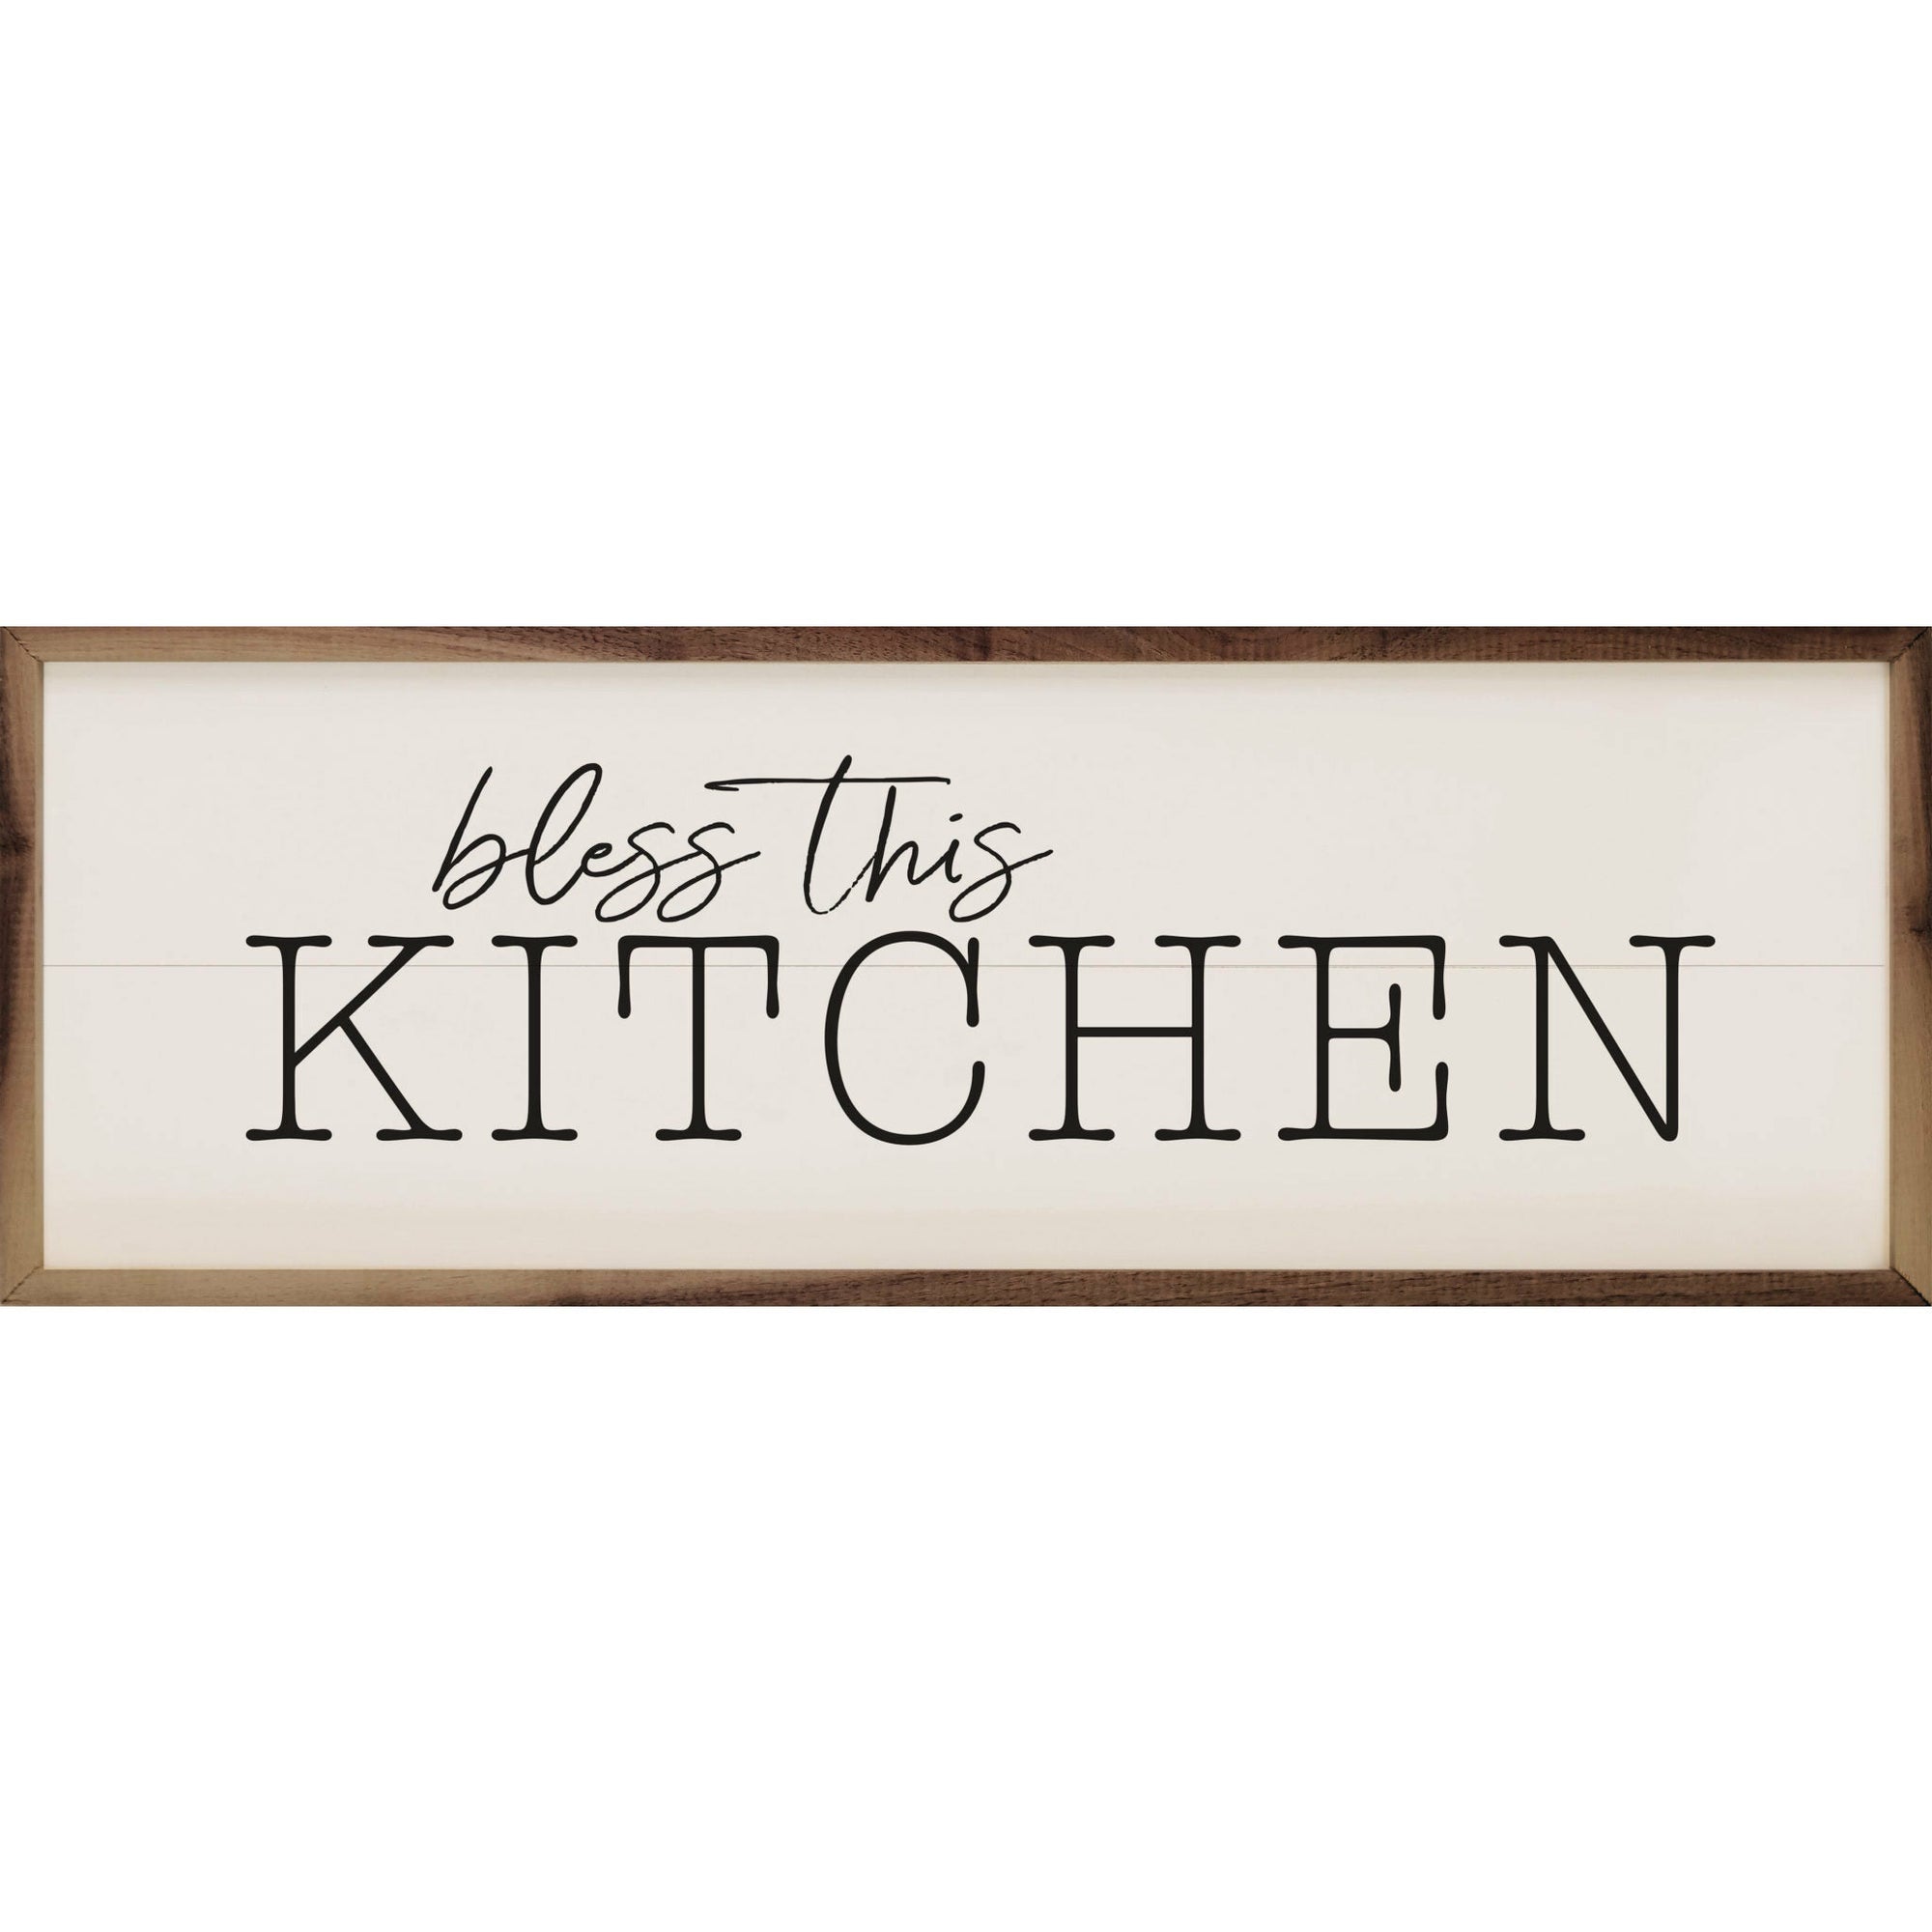 Bless This Kitchen Wood Framed Print